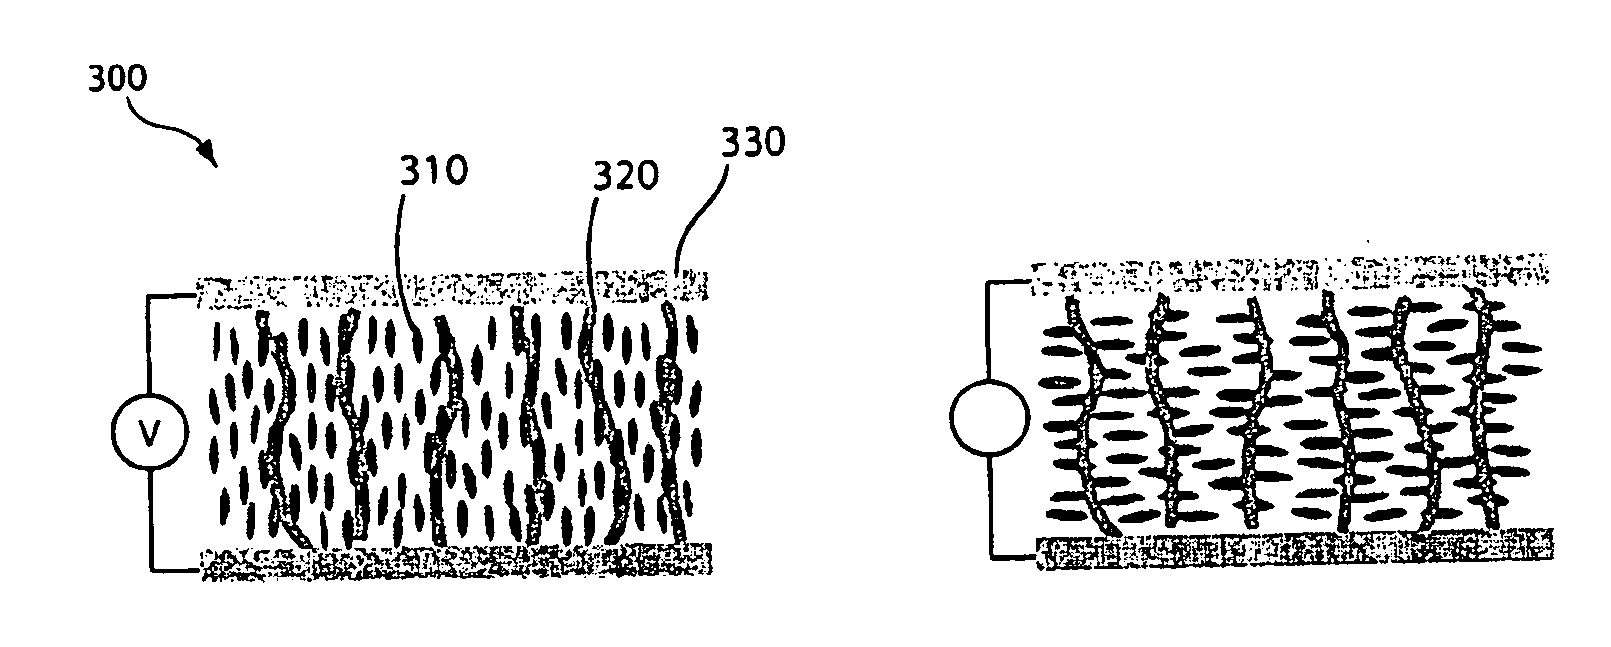 Devices and methods involving polymers aligned via interchain interactions